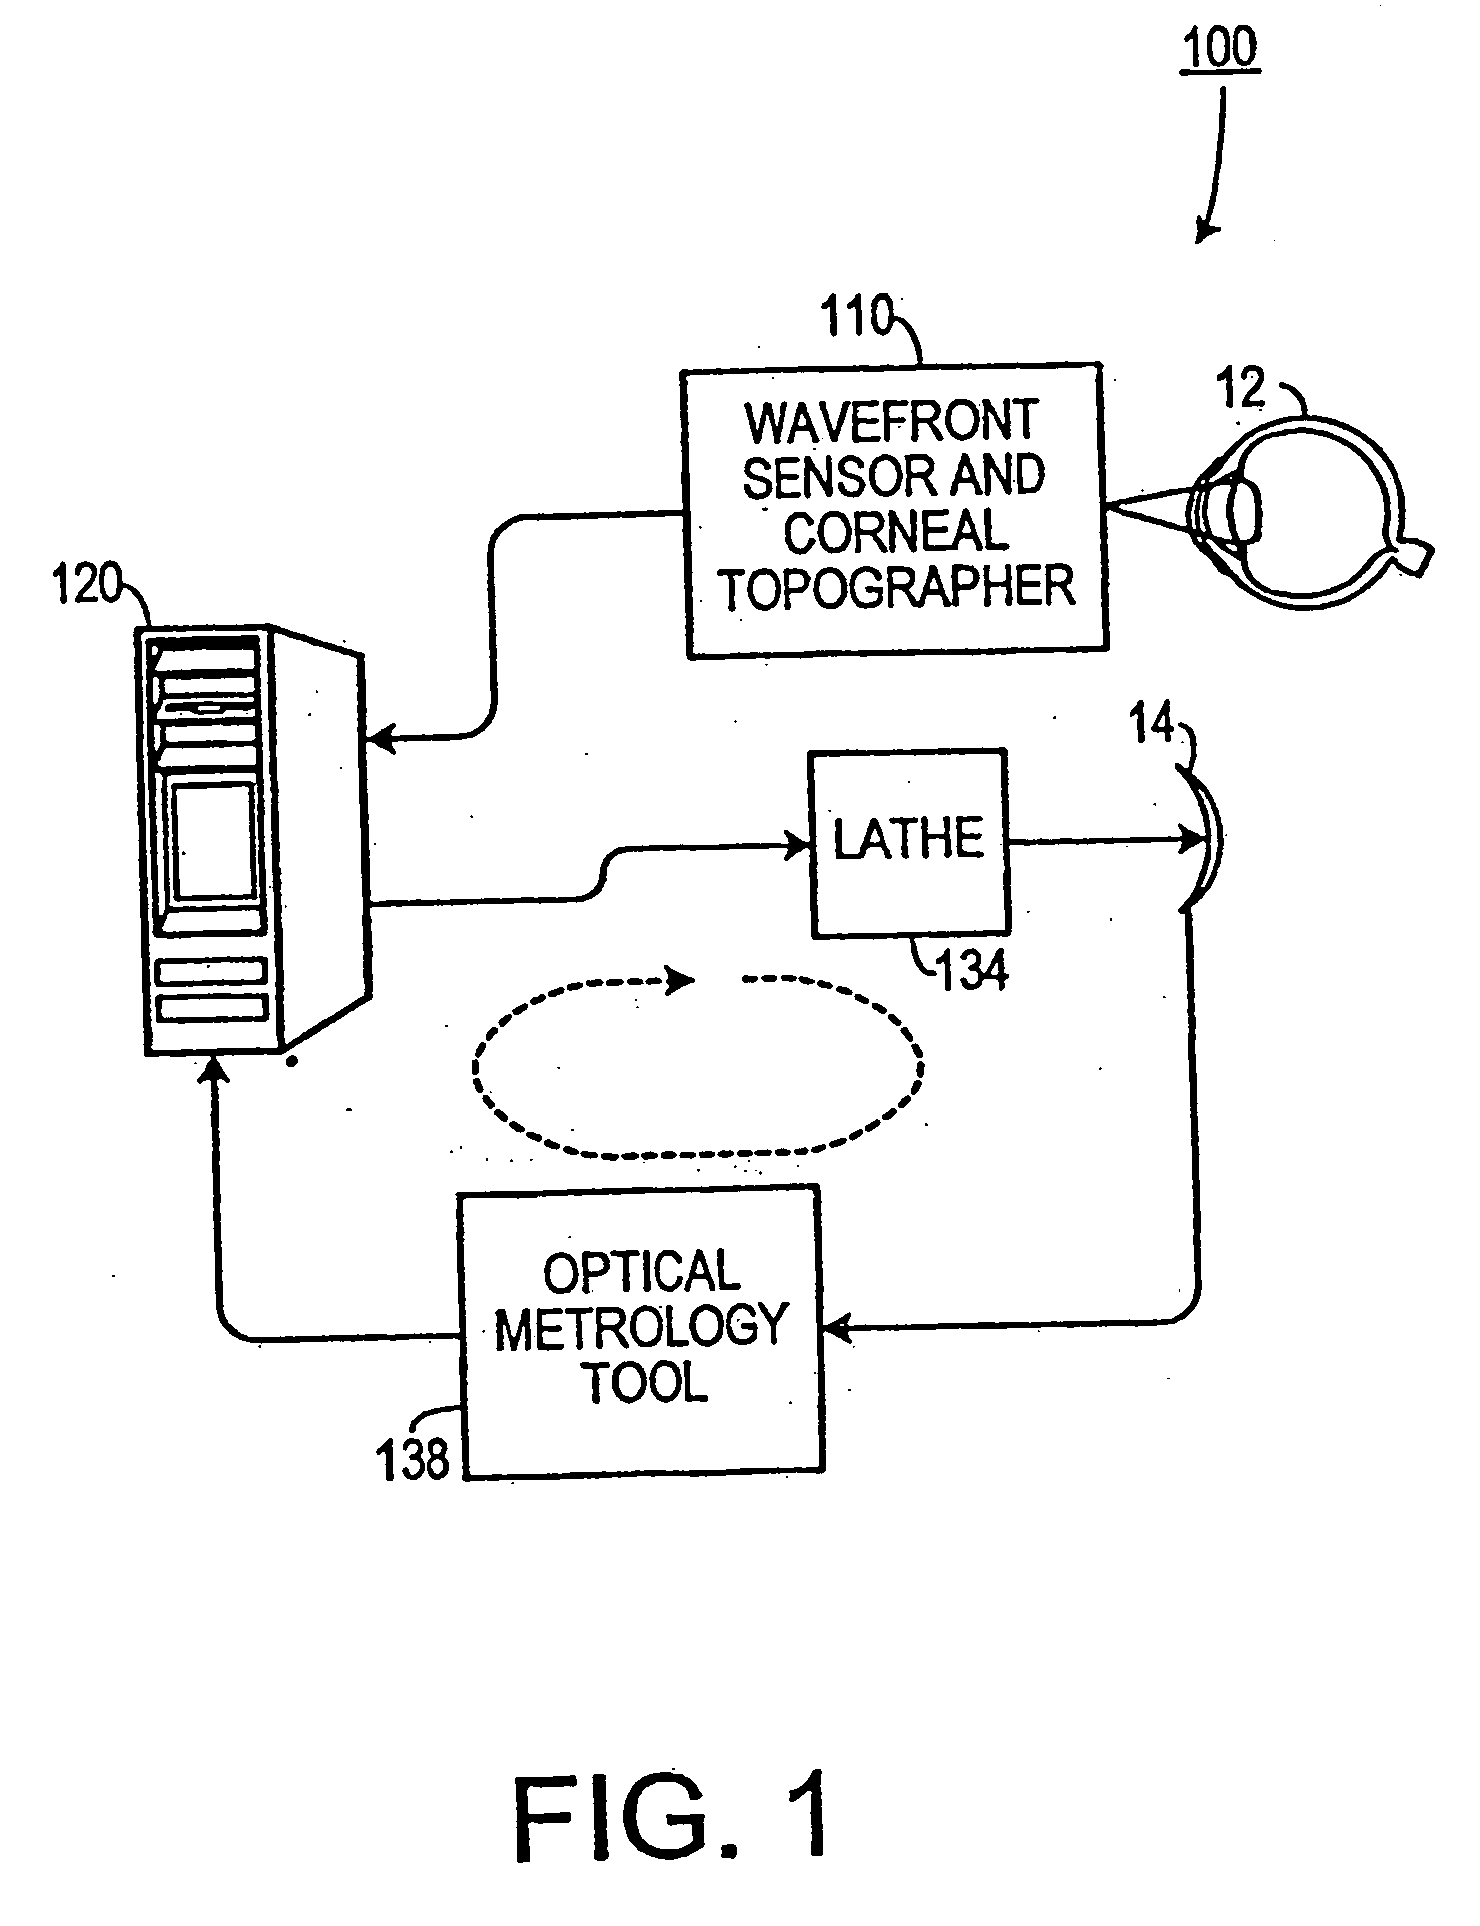 Automatic lens design and manufacturing system